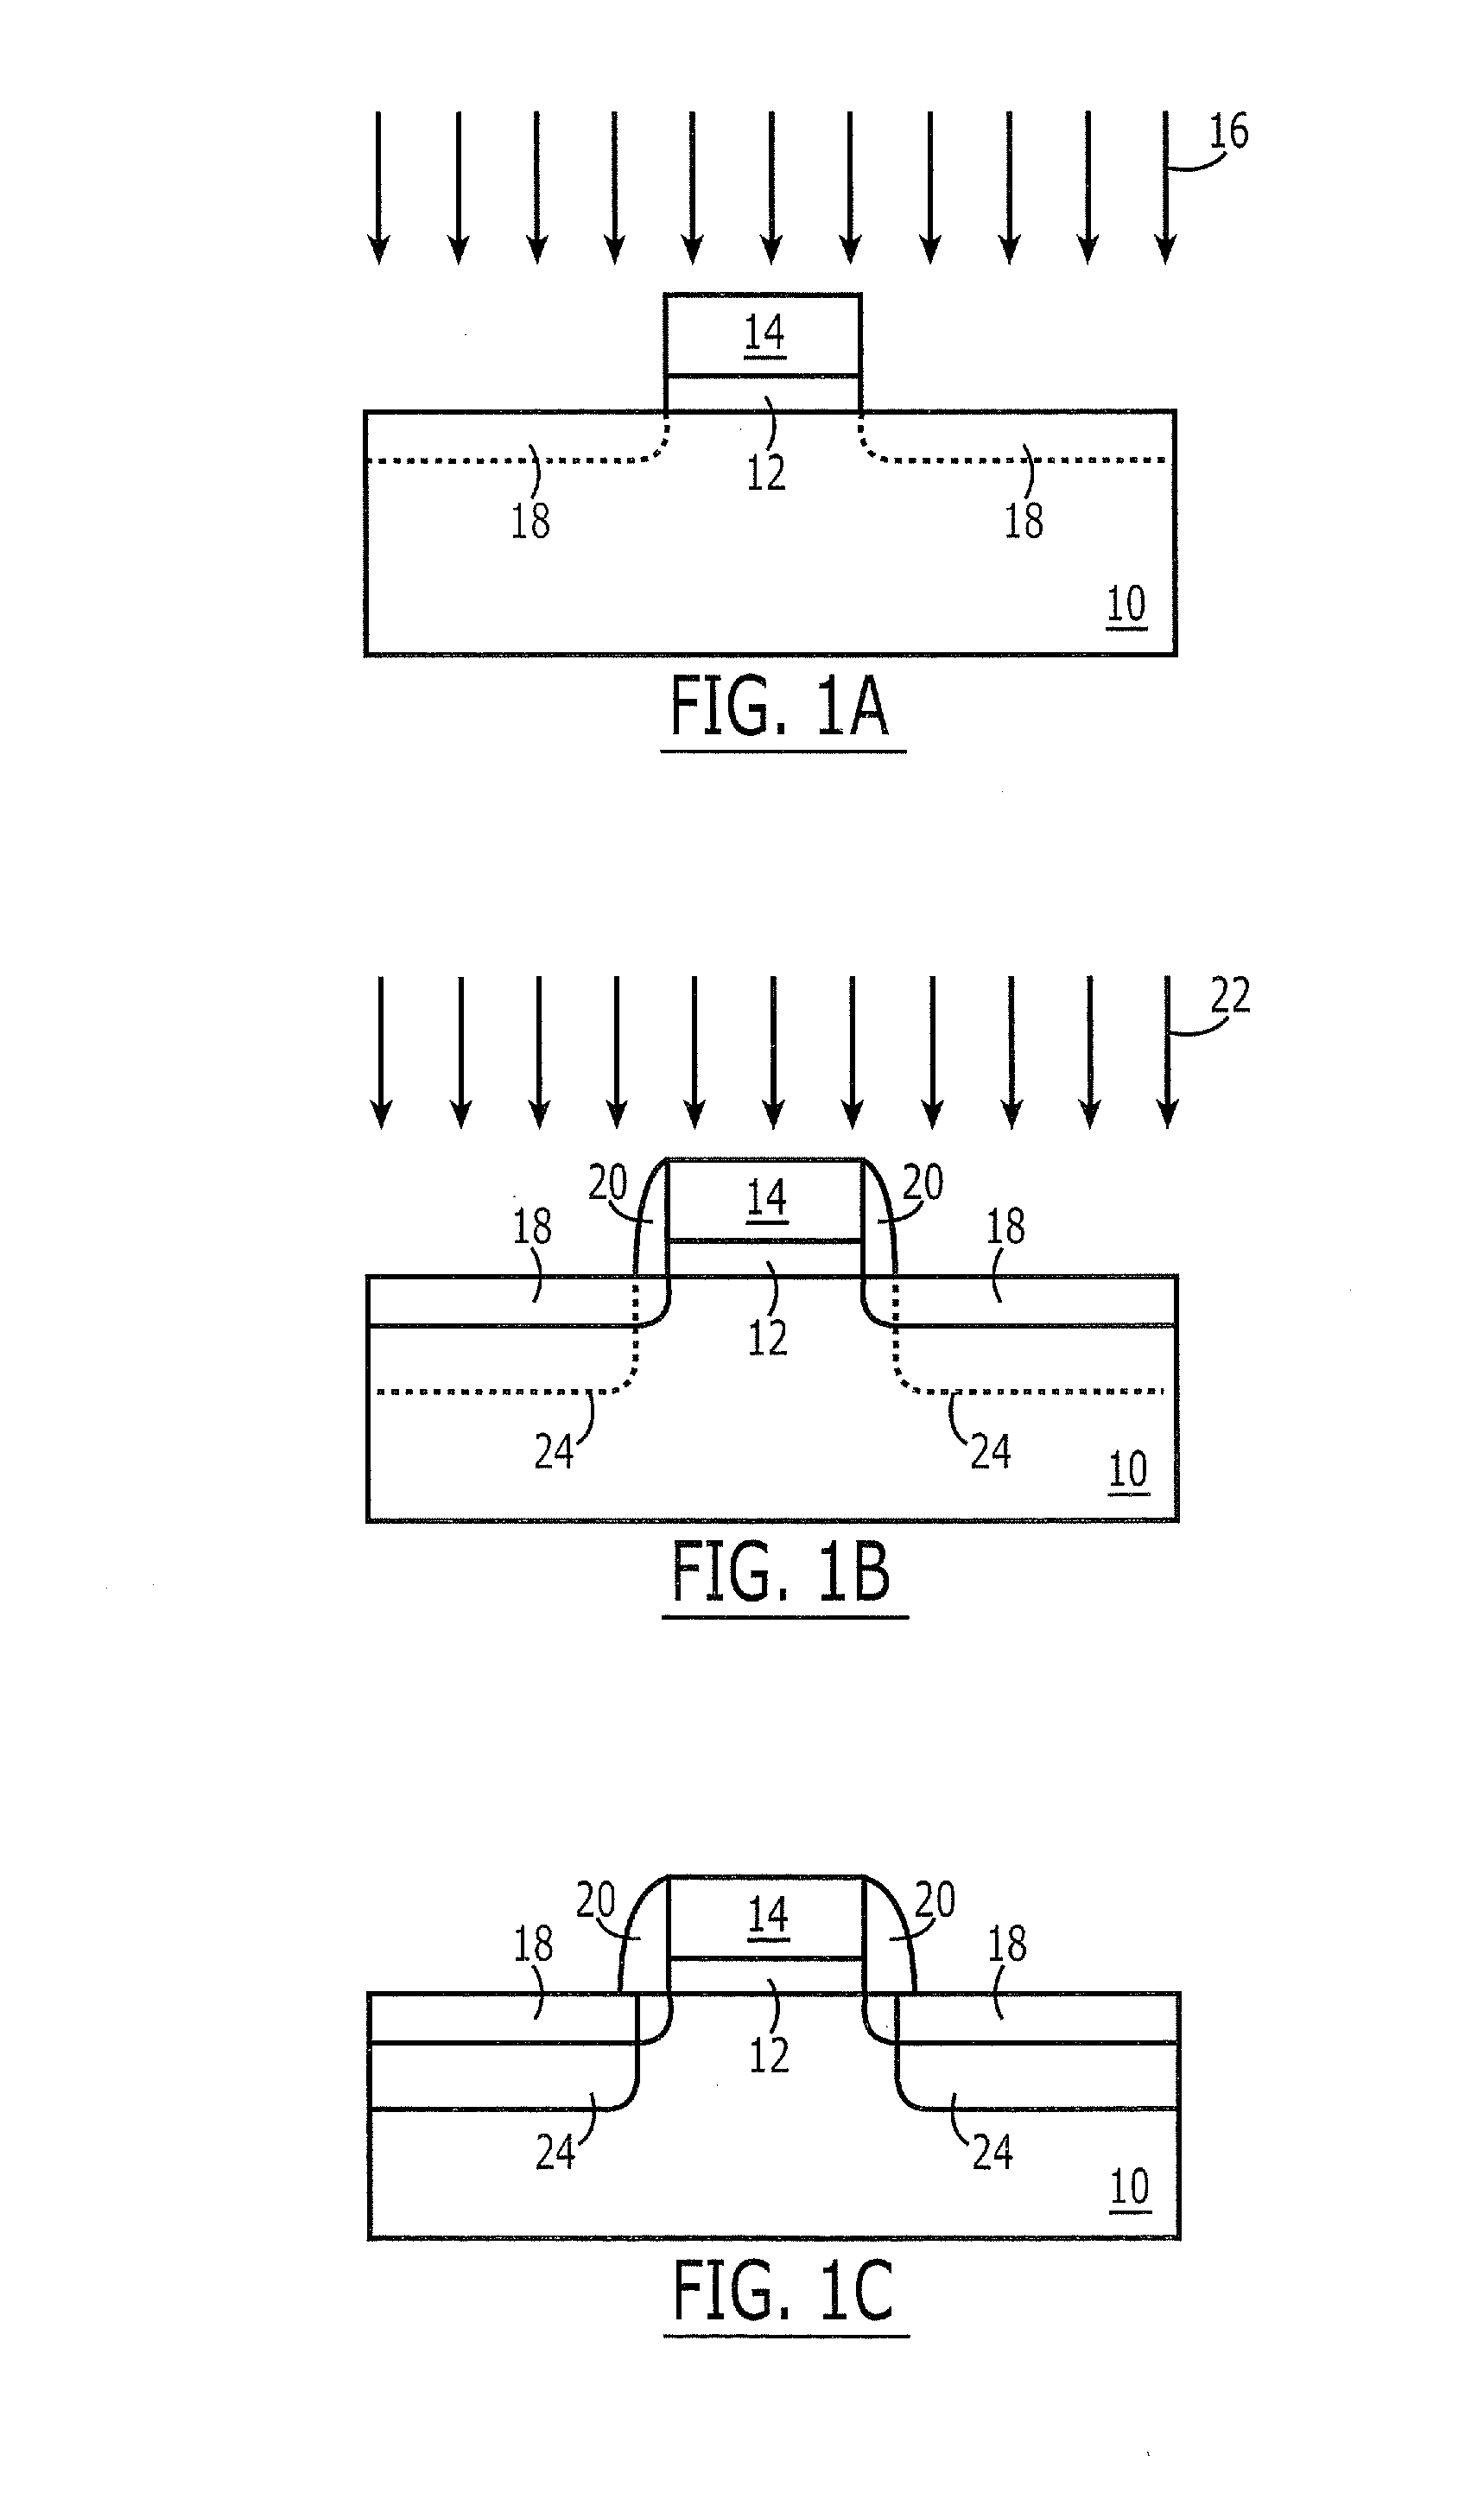 Methods of Forming Field Effect Transistors Having Silicon-Germanium Source and Drain Regions